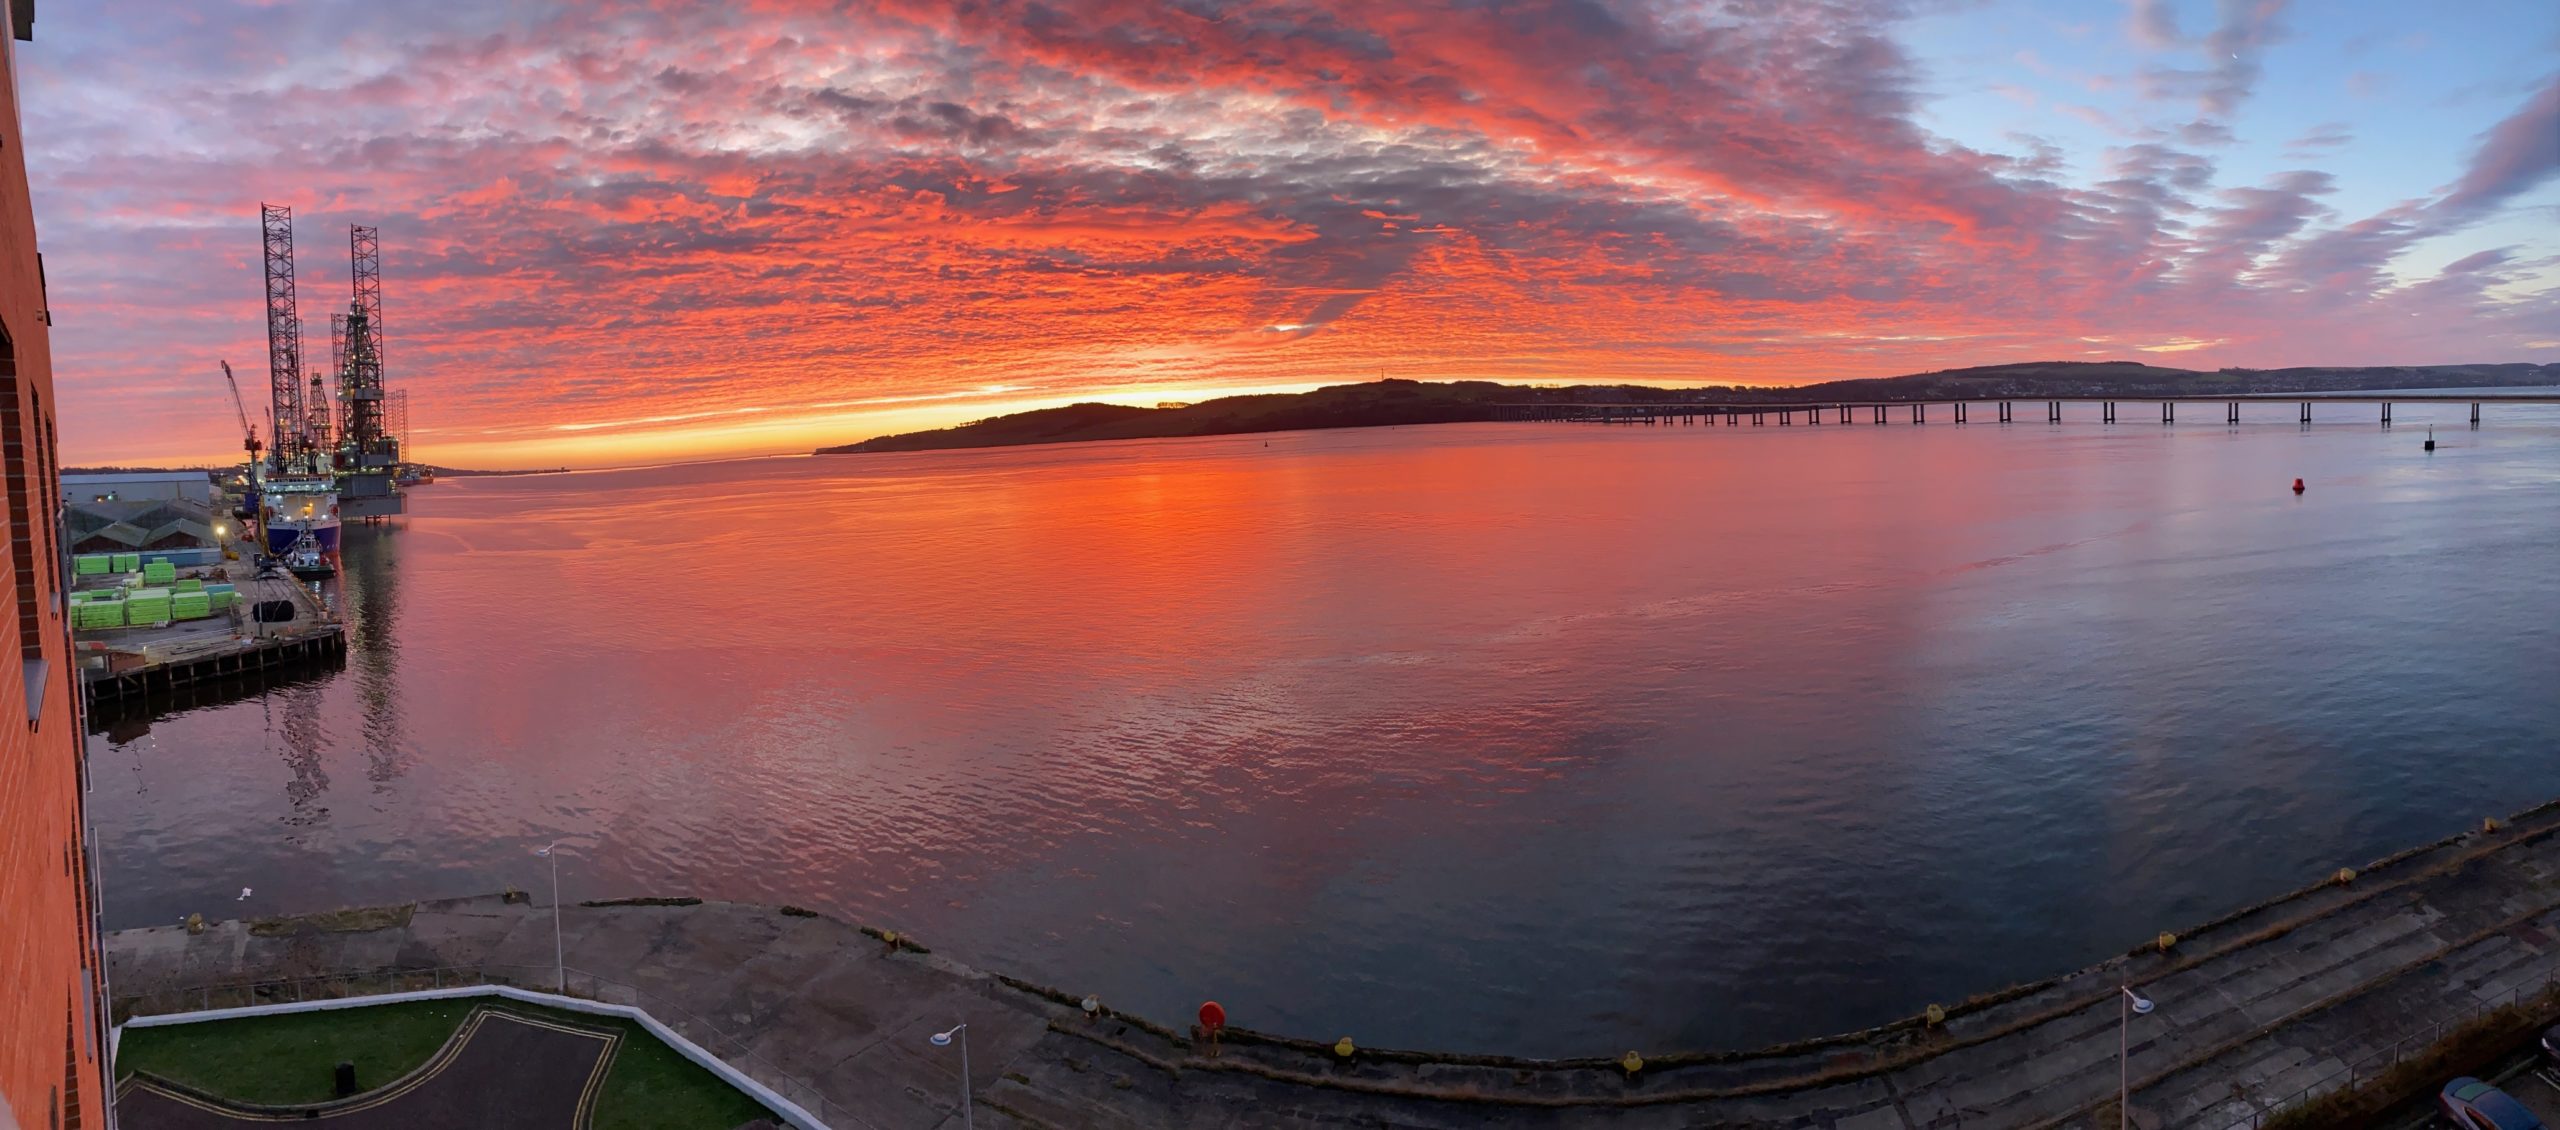 Sunrise over the Tay by Ian MacDougall.